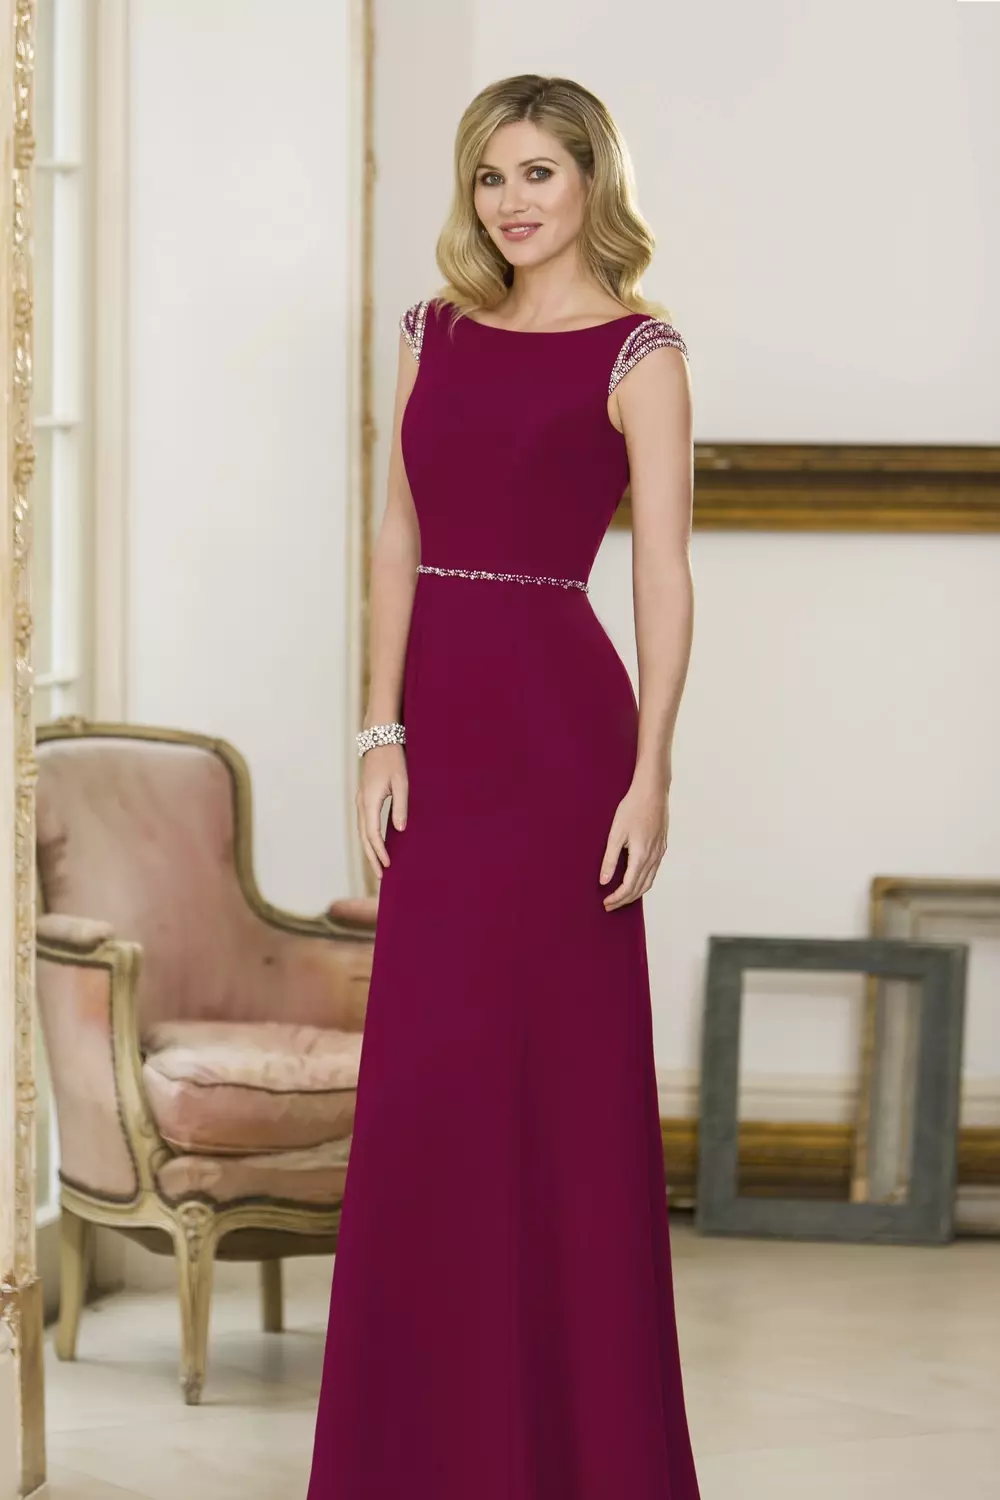 M743 | Low Back Bridesmaids Dress with Cap Sleeves | True Bridesmaids